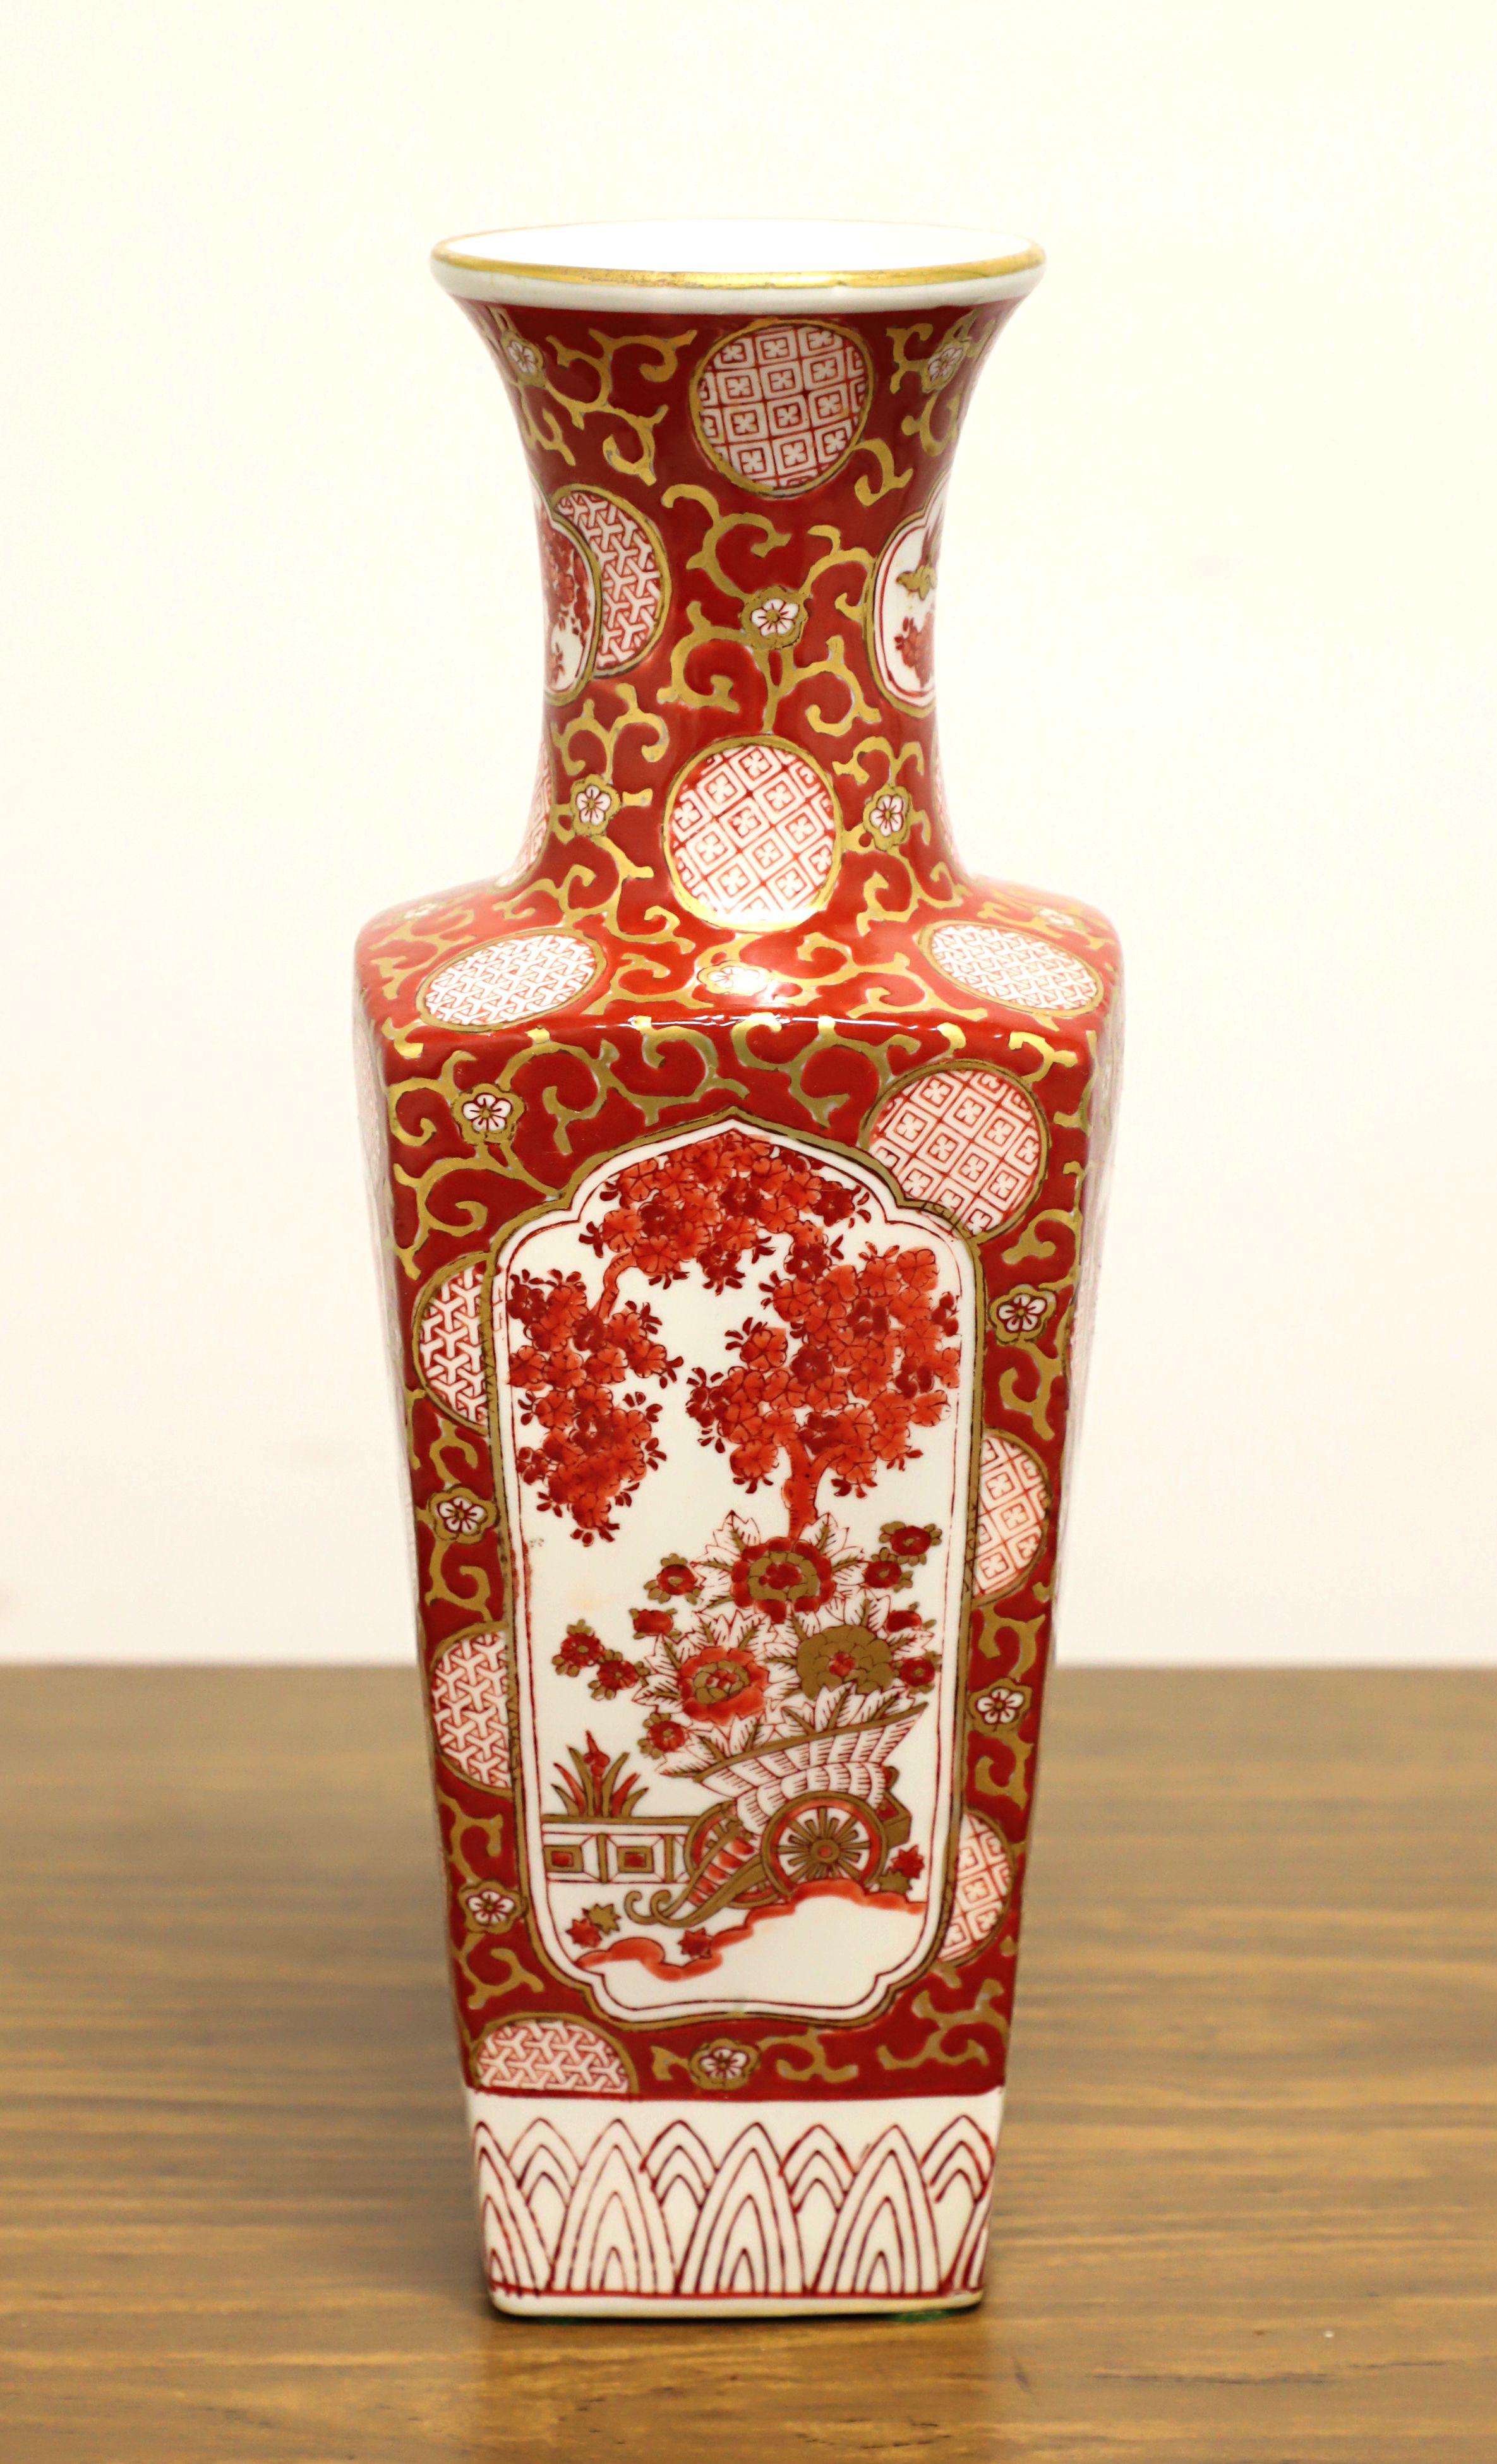 An Asian Chinoiserie style table vase, unbranded. Hand painted porcelain with a Chinoiserie design of foliate, floral & geometric shapes in shades of white, red & salmon colors with gold trim, and a tapered square urn shape with round neck. Likely